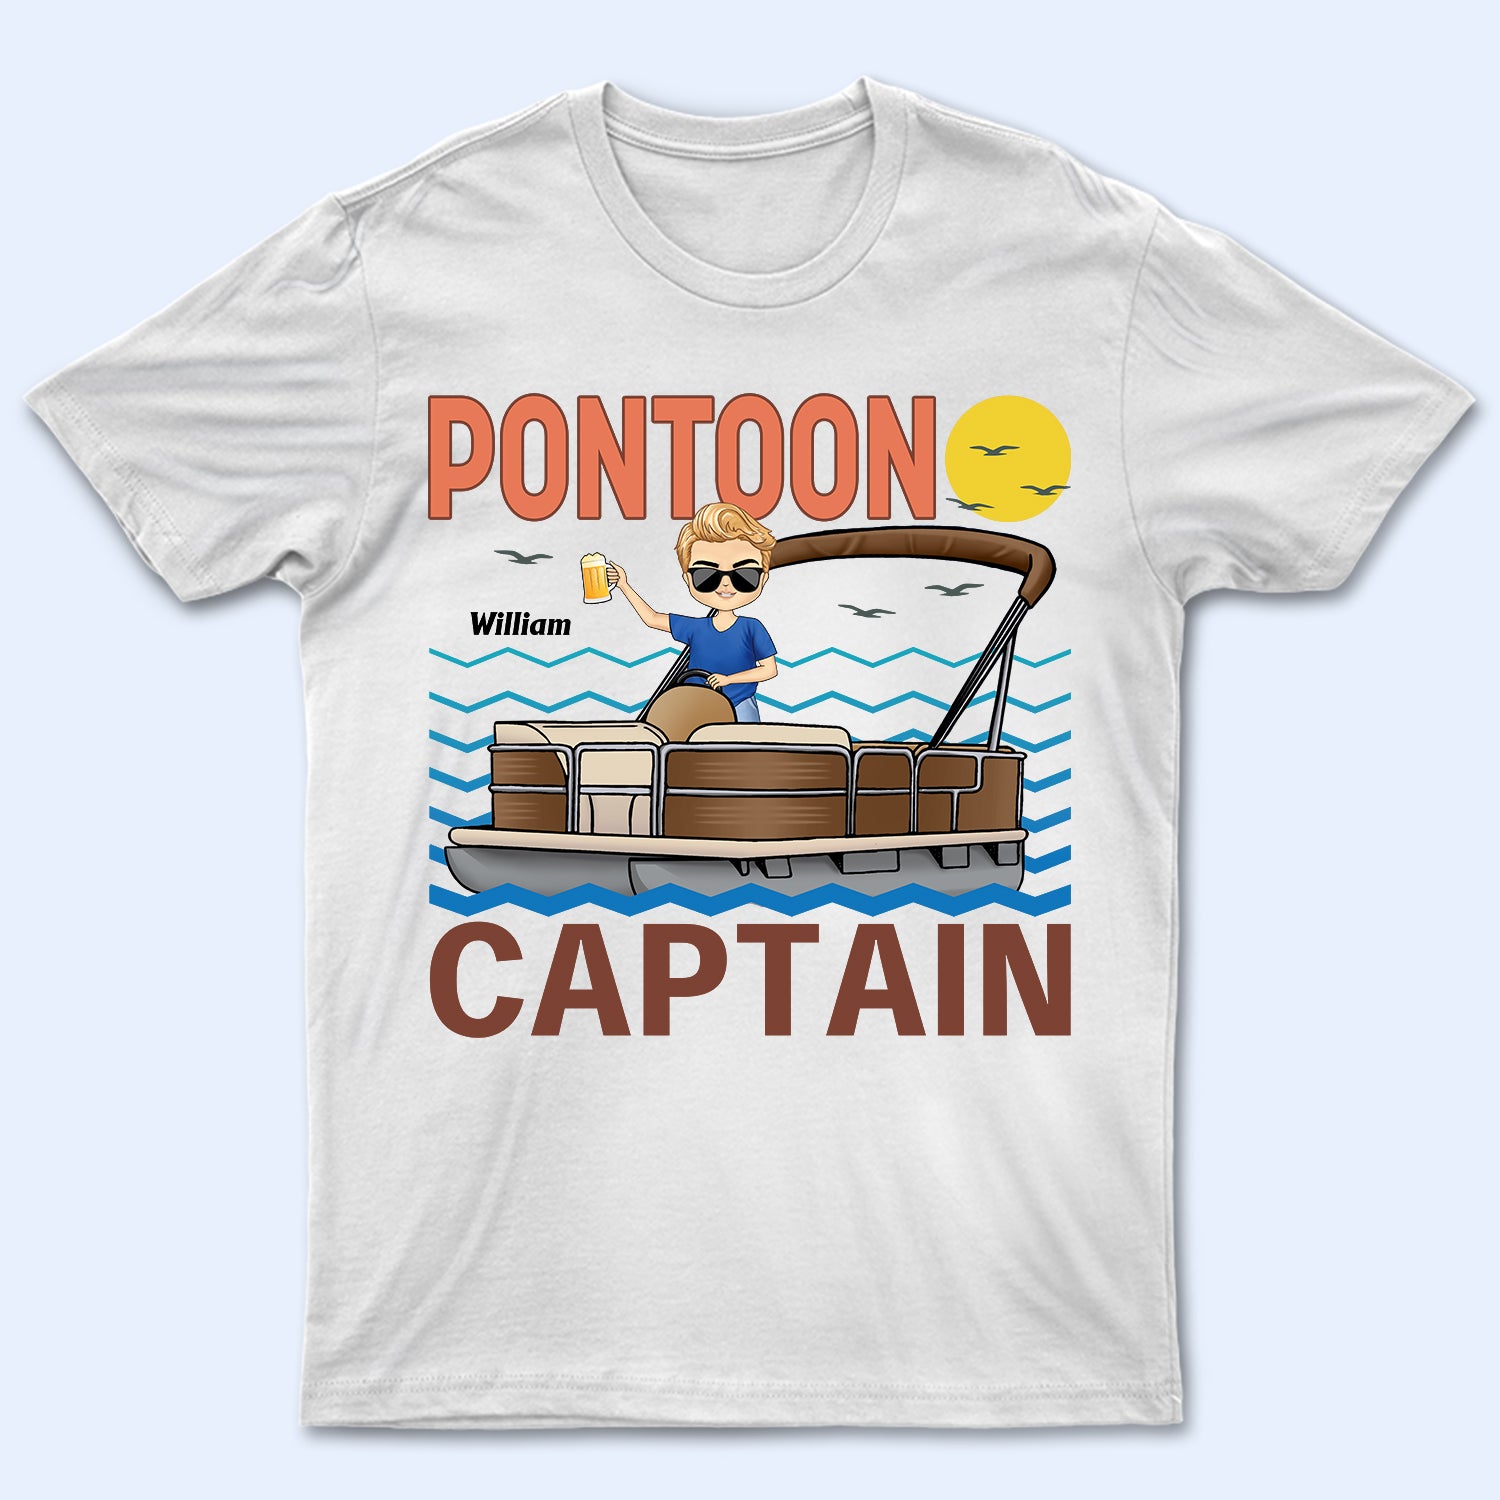 Pontoon Captain Pontoon Queen - Birthday, Anniversary, Travel, Vacation Gift For Woman, Man - Personalized T Shirt